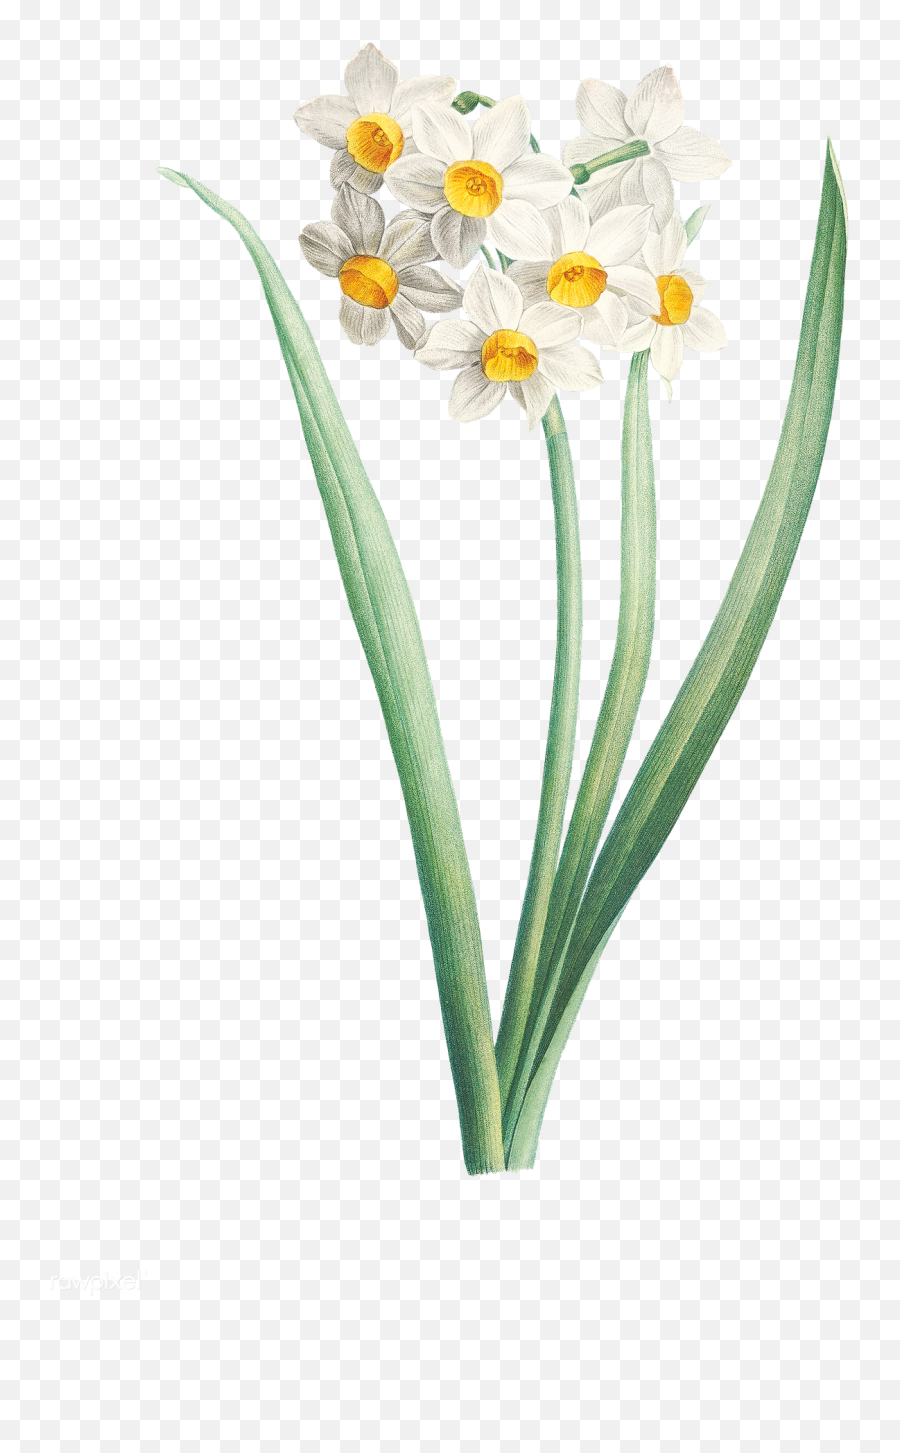 Narcissus Flower Png Free - Flower,Daffodil Png